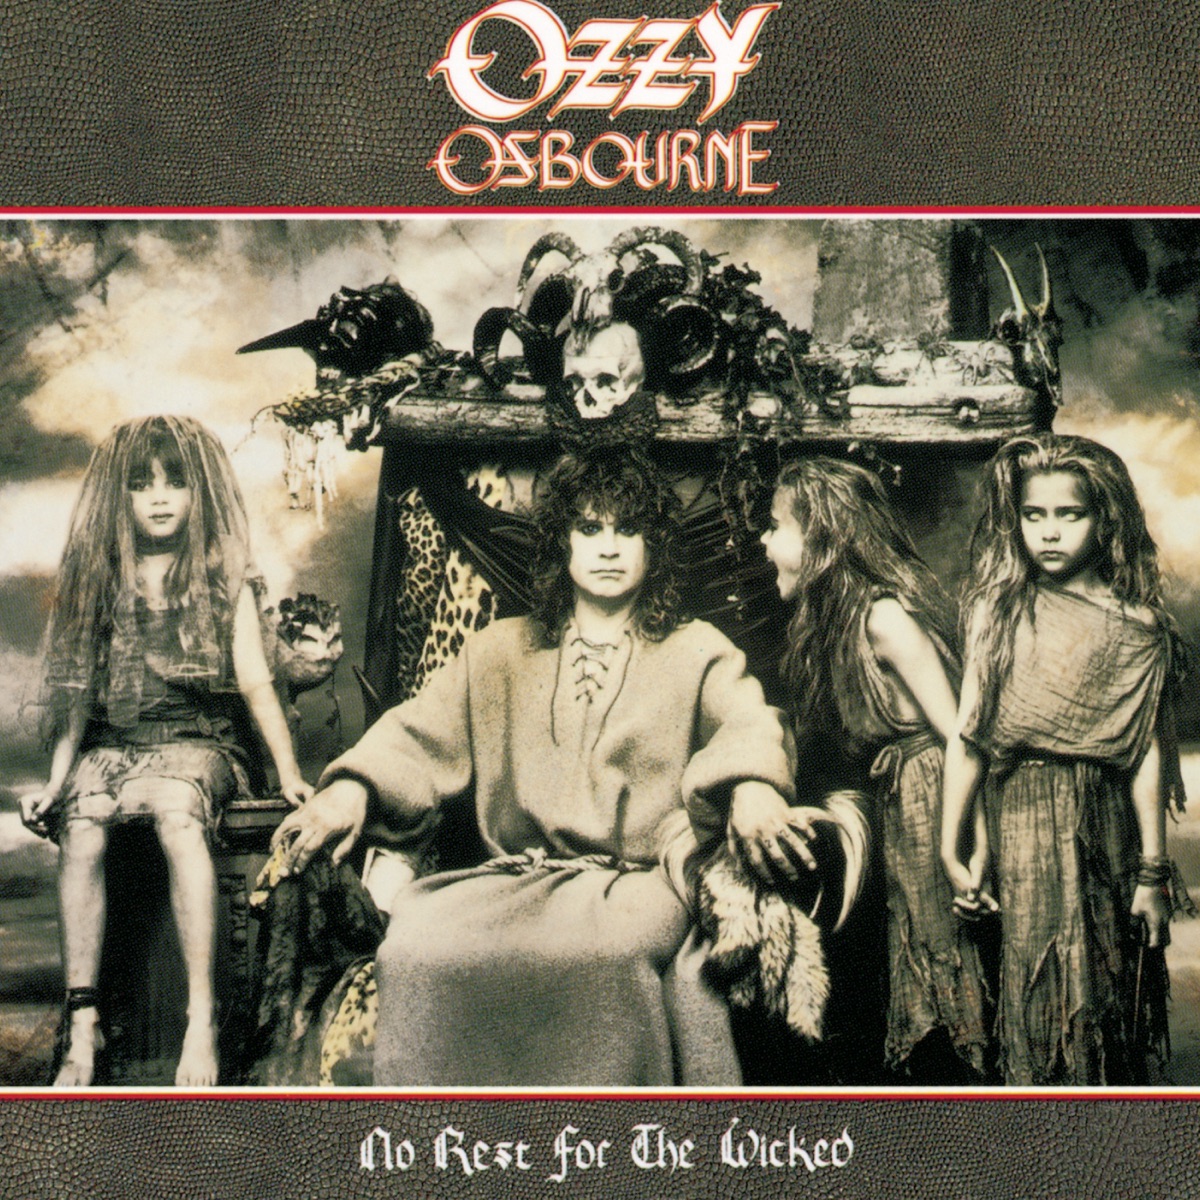 The Ultimate Sin by Ozzy Osbourne on Apple Music